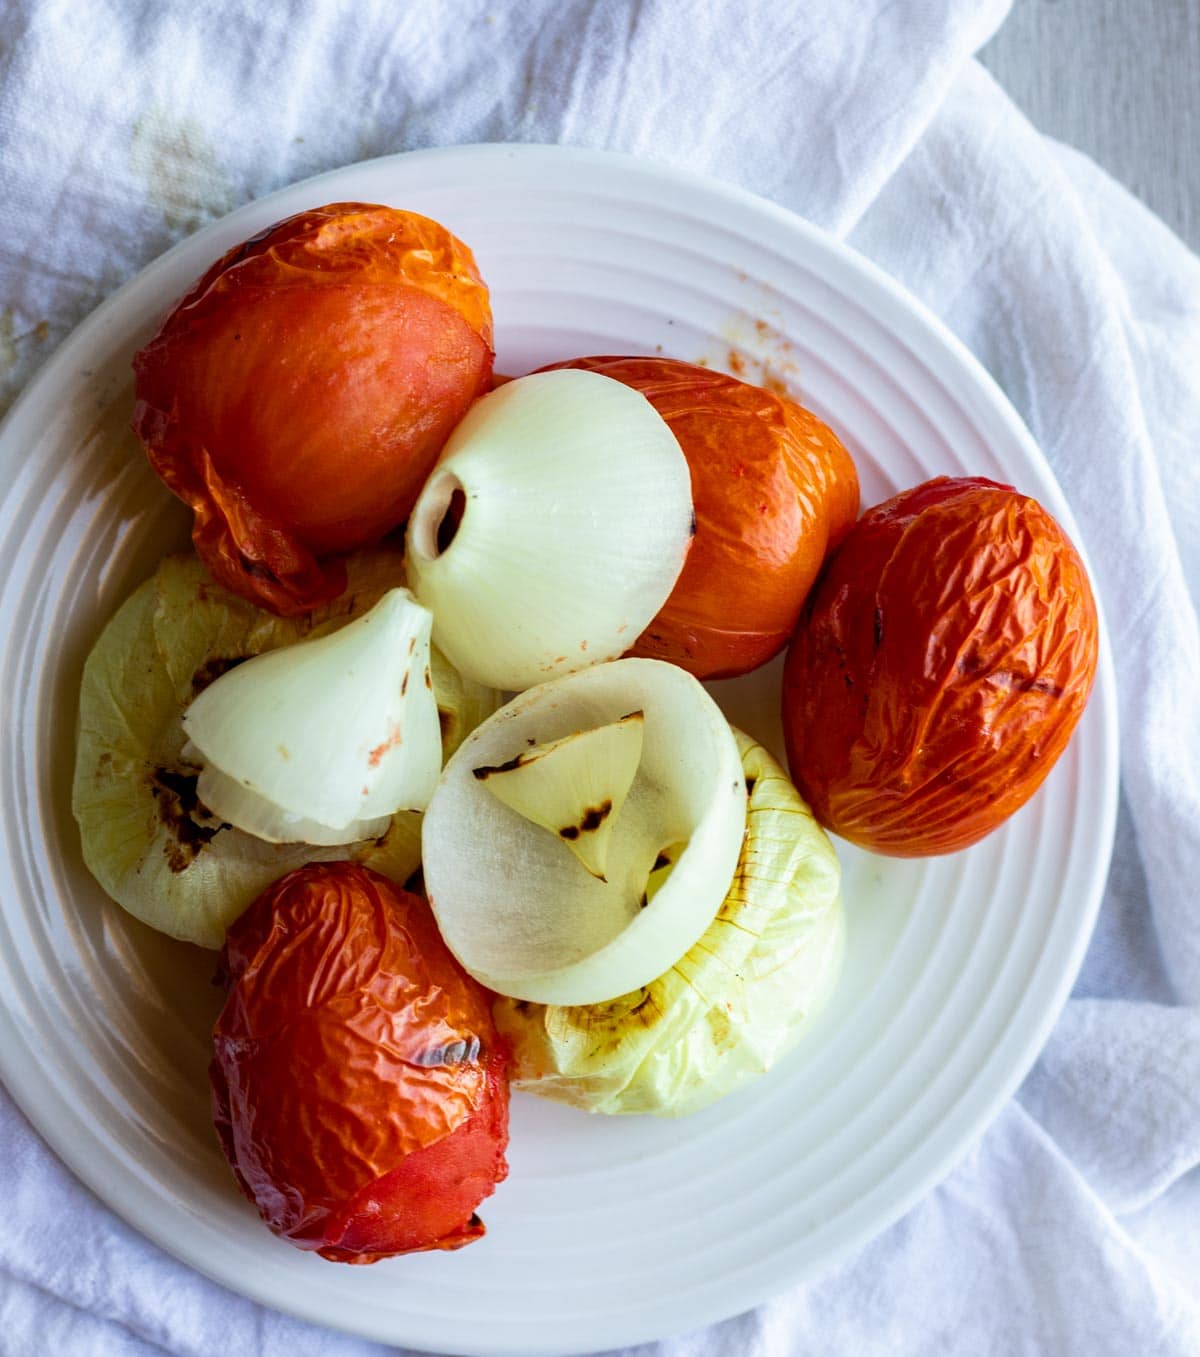 Roasted tomatoes and onions on a white plate.